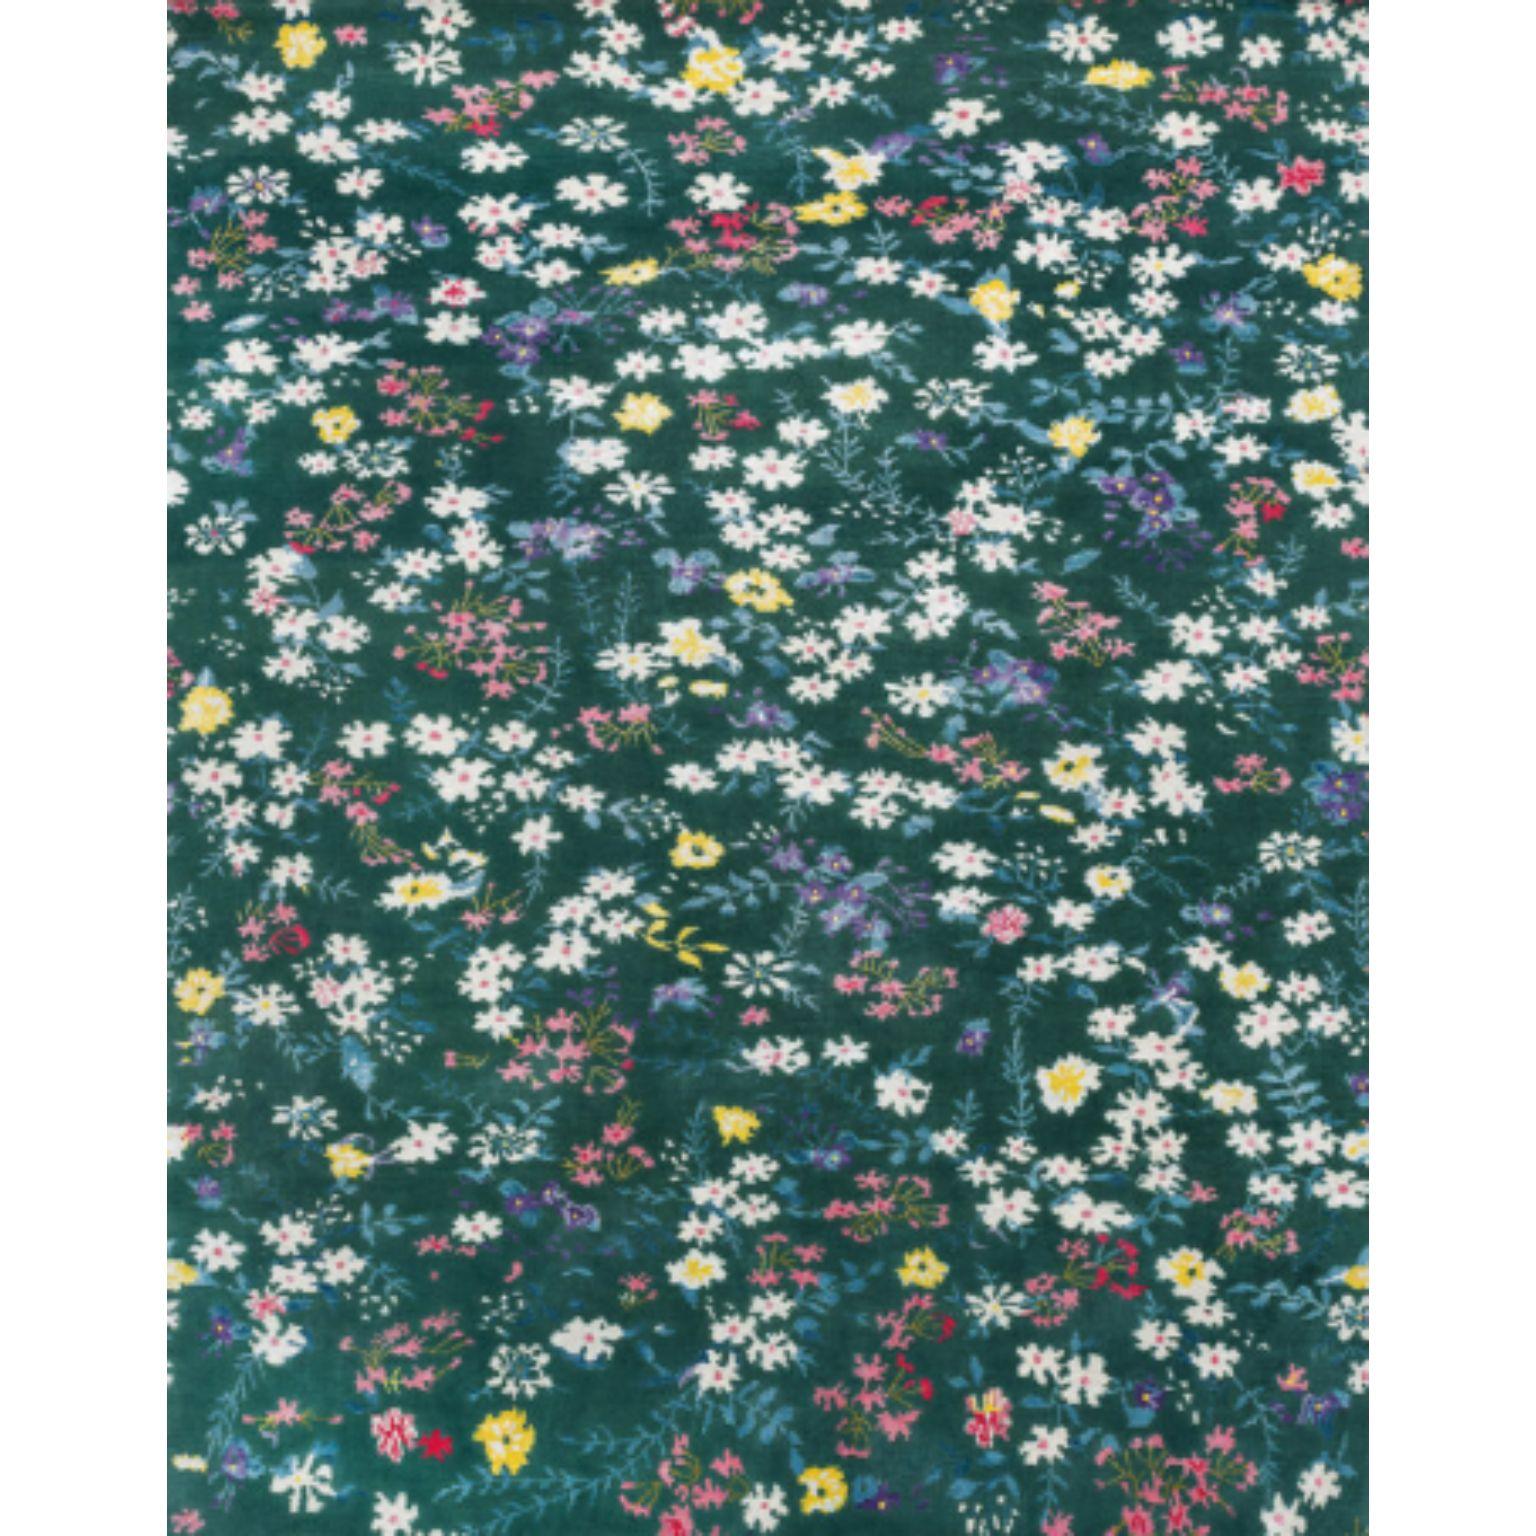 CHLOE' Rug by Illulian
Dimensions: D300 x H200 cm 
Materials: Wool 50%, Silk 50%
Variations available and prices may vary according to materials and sizes. Please contact us.

Illulian, historic and prestigious rug company brand,